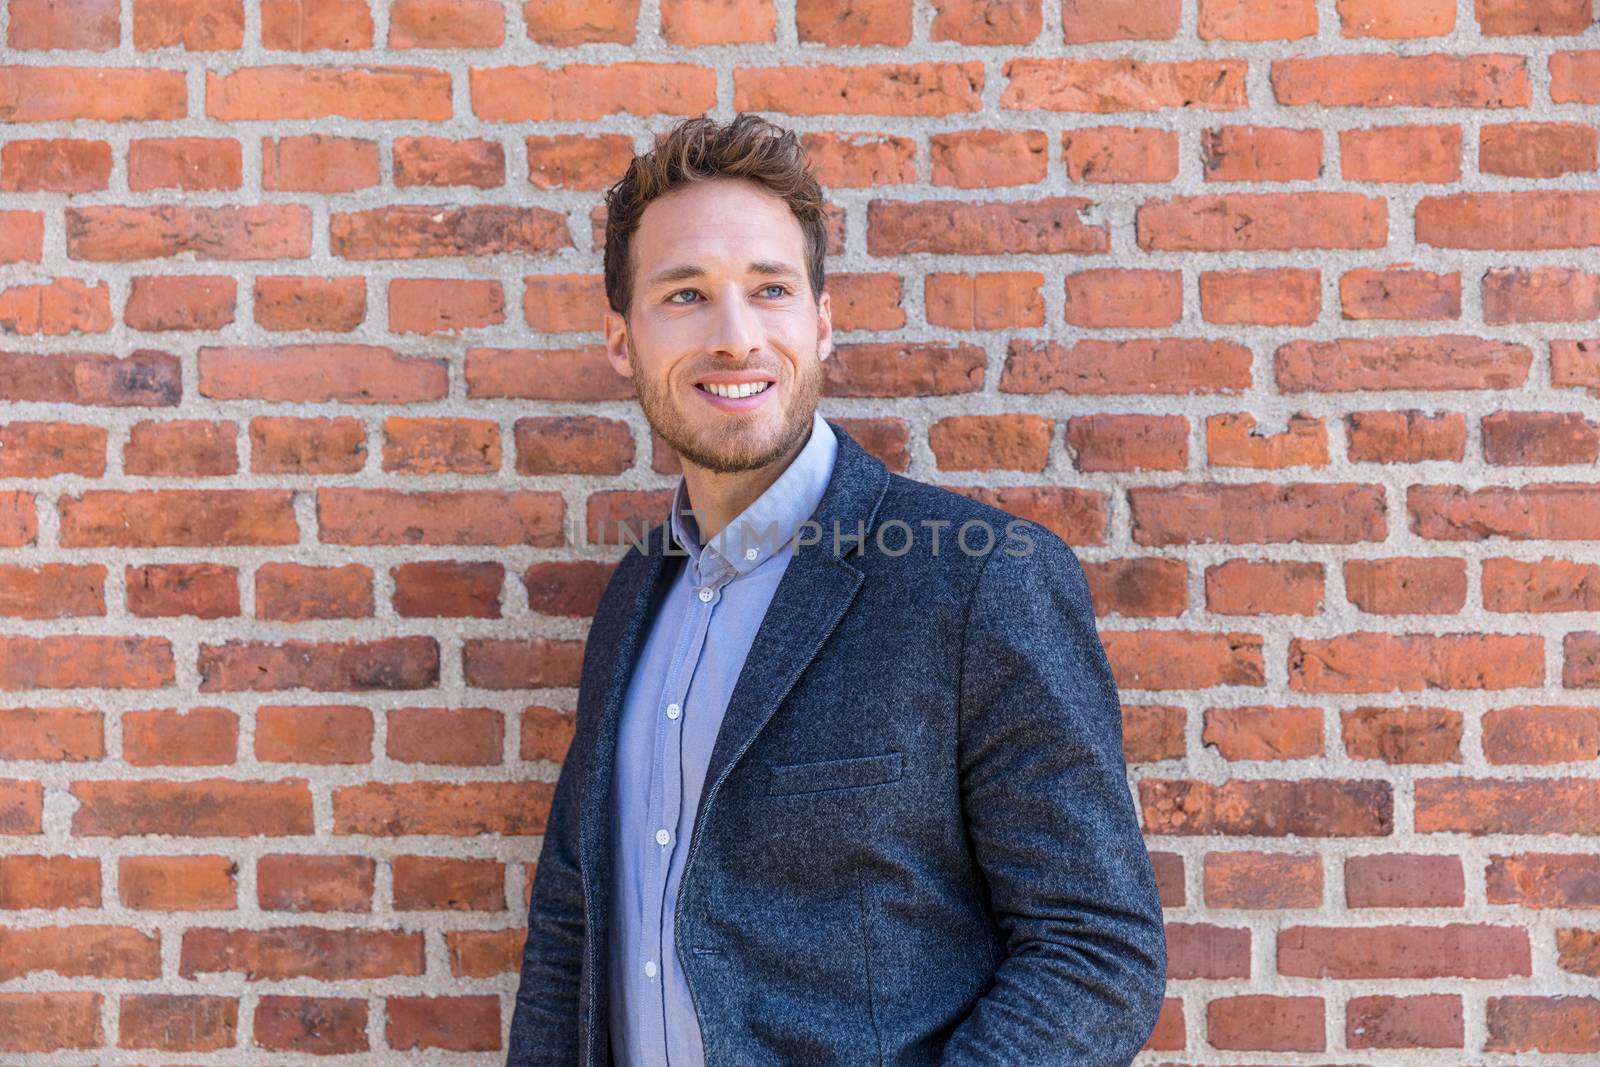 Man professional businessman portrait. Smart casual urban business man smiling happy at office building or city street. Handsome man wearing suit jacket indoors by Maridav